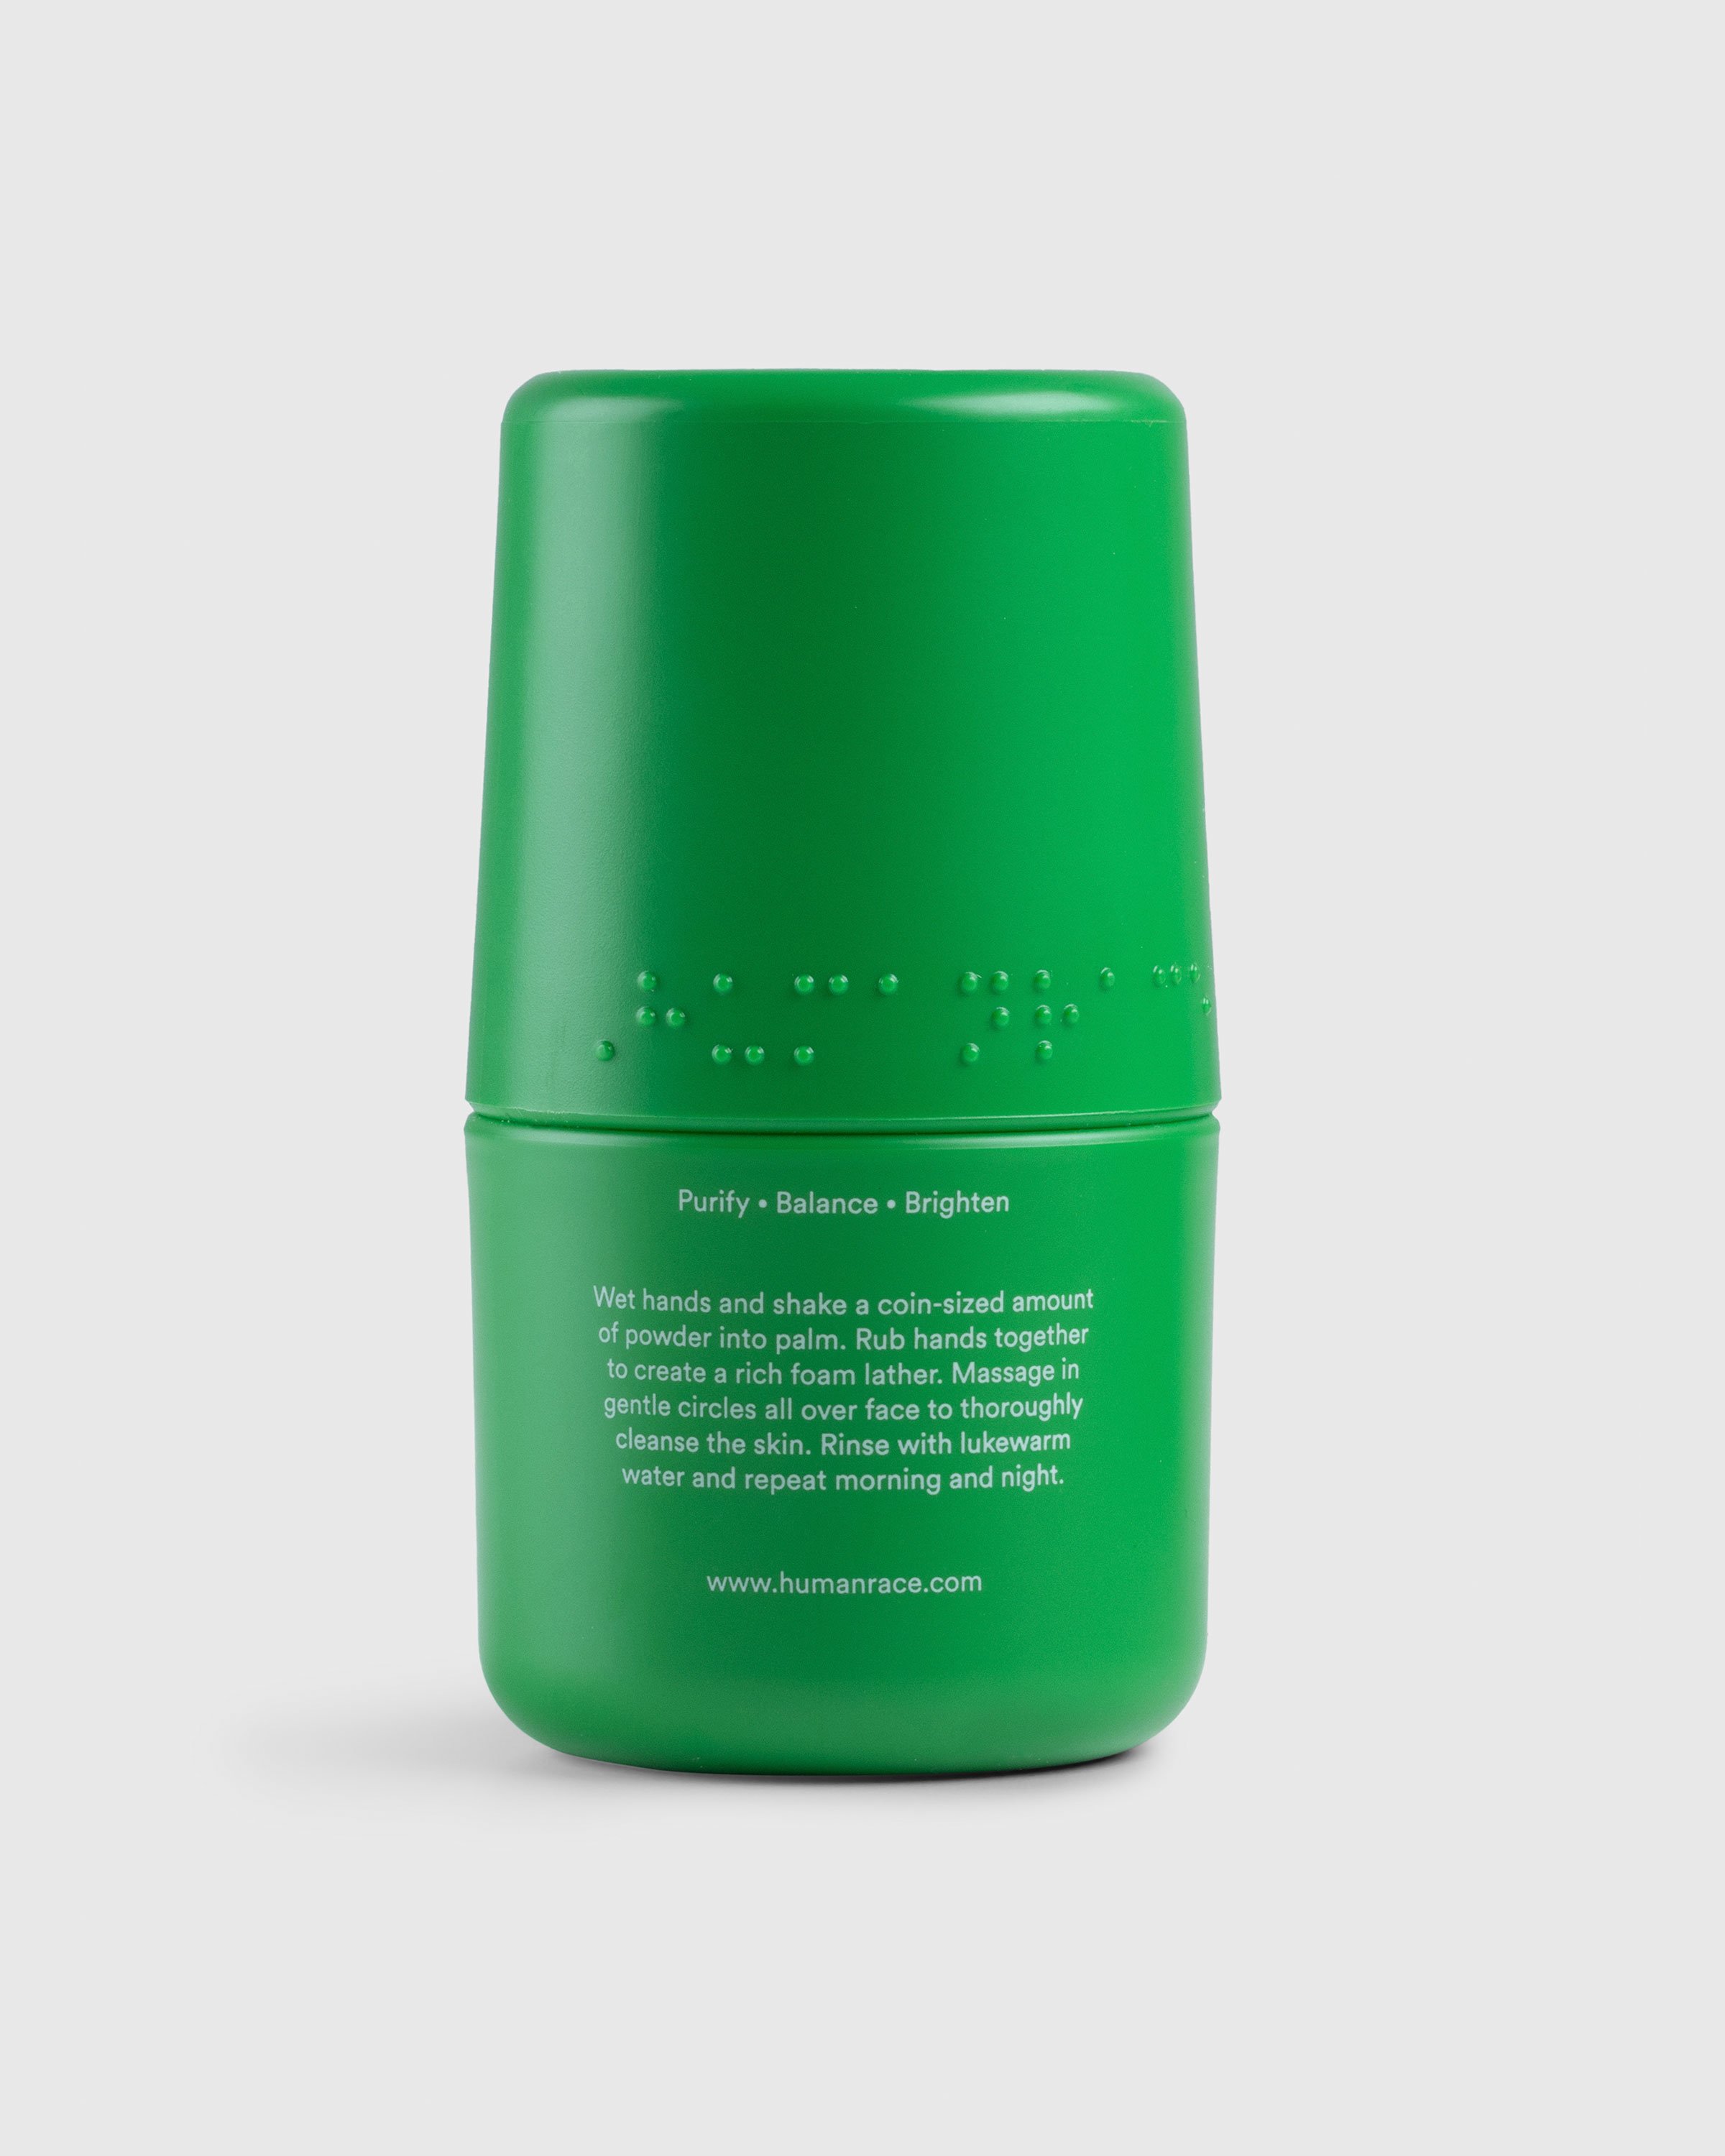 Humanrace - Rice Powder Cleanser - Lifestyle - Green - Image 3